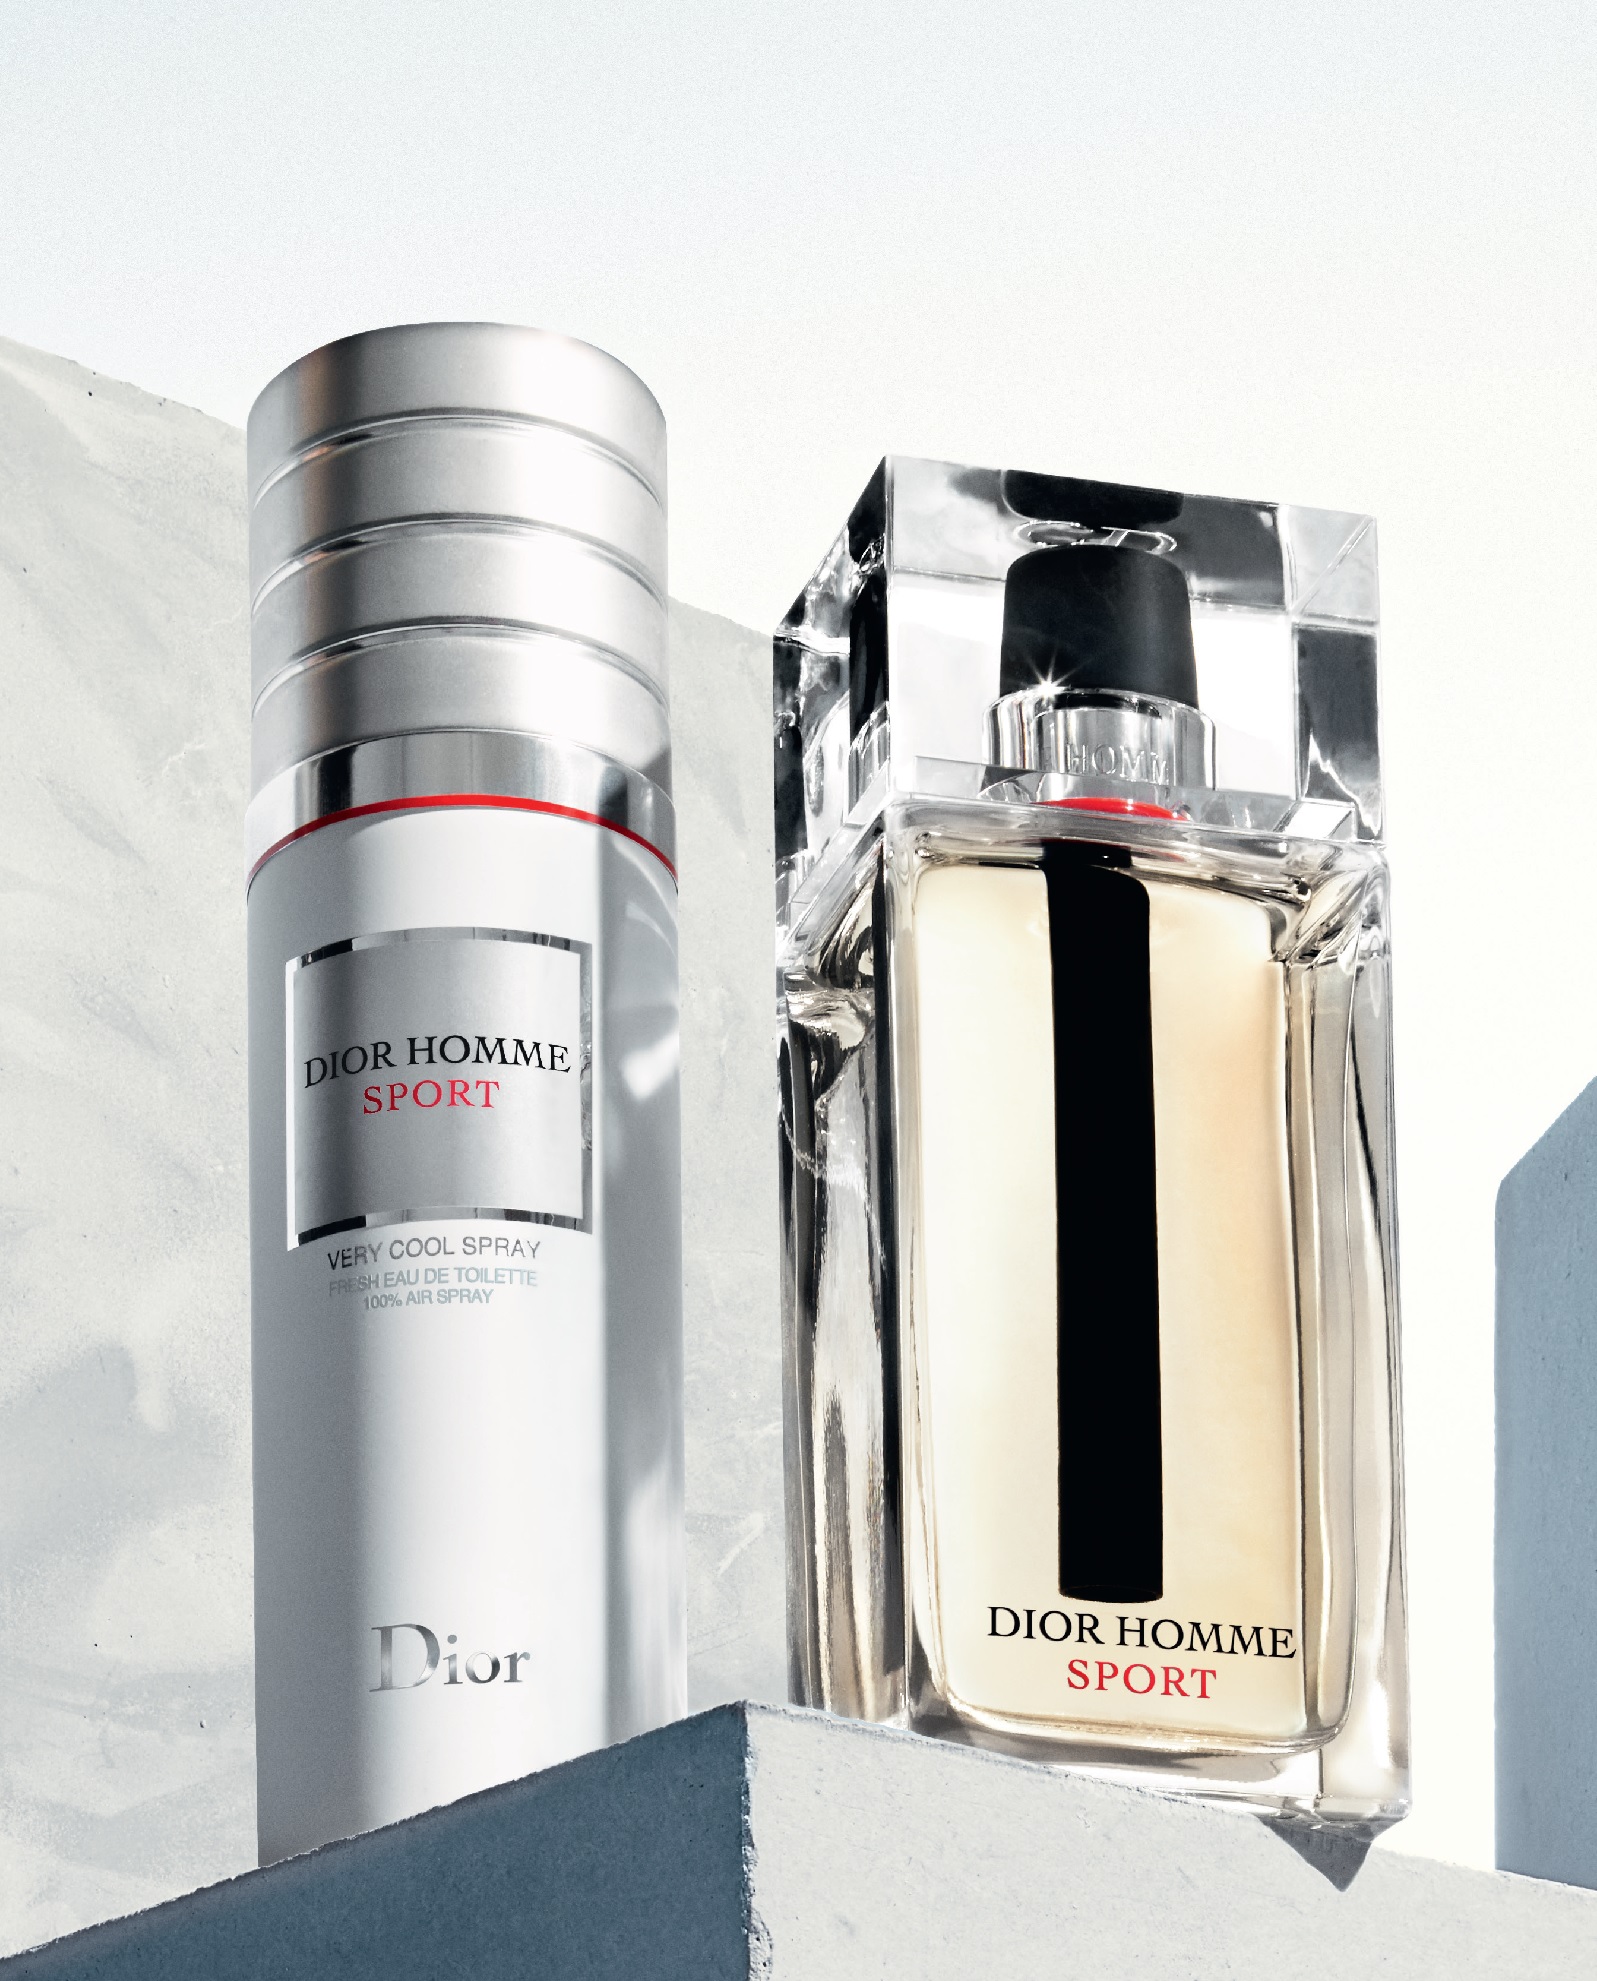 dior homme sport by christian dior